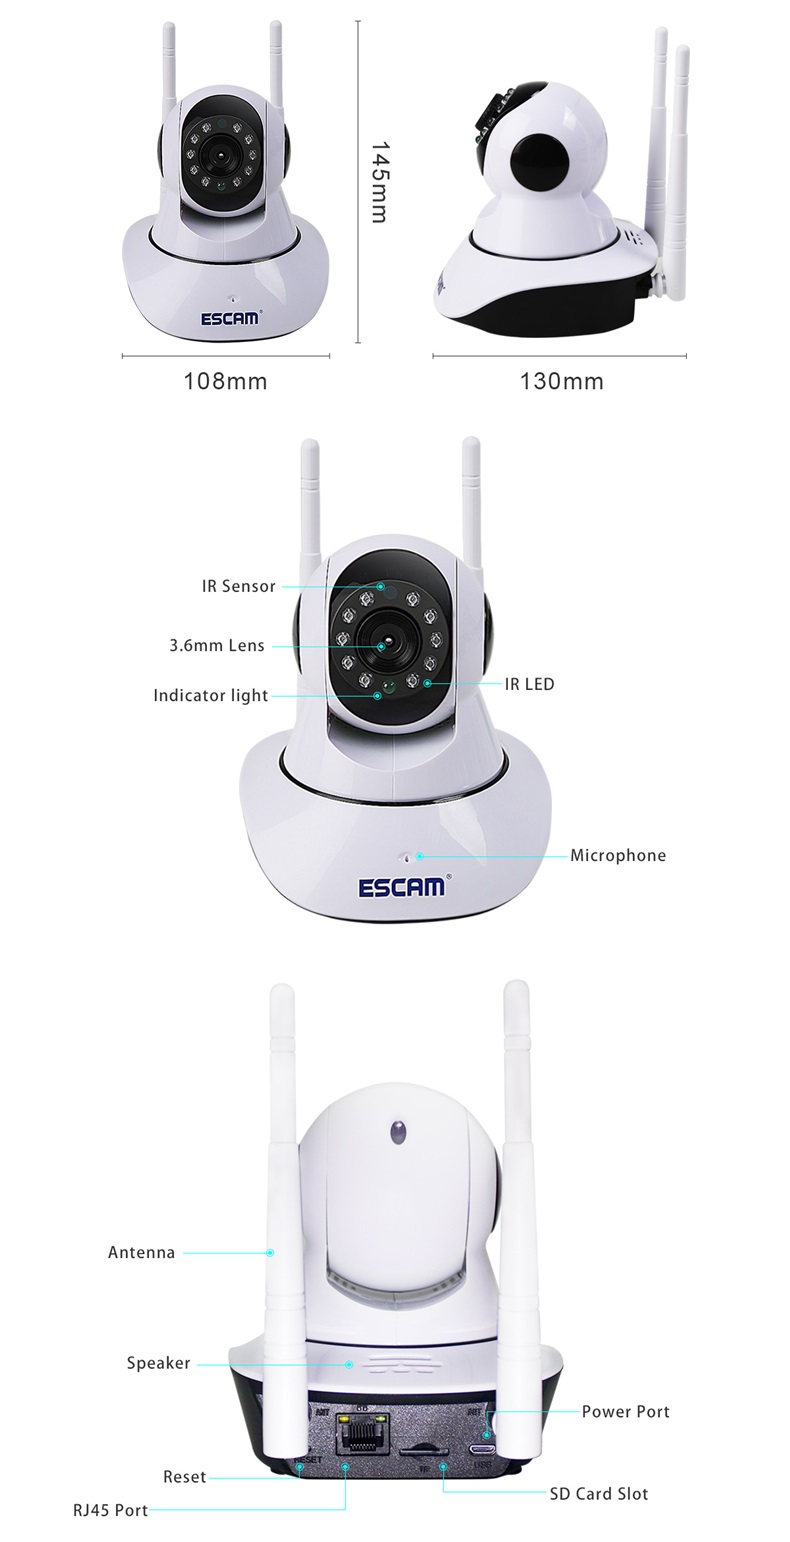 ESCAM G02 Dual Antenna 720P Pan/Tilt WiFi IP IR Camera Support ONVIF Max Up to 128GB Video Monitor 72